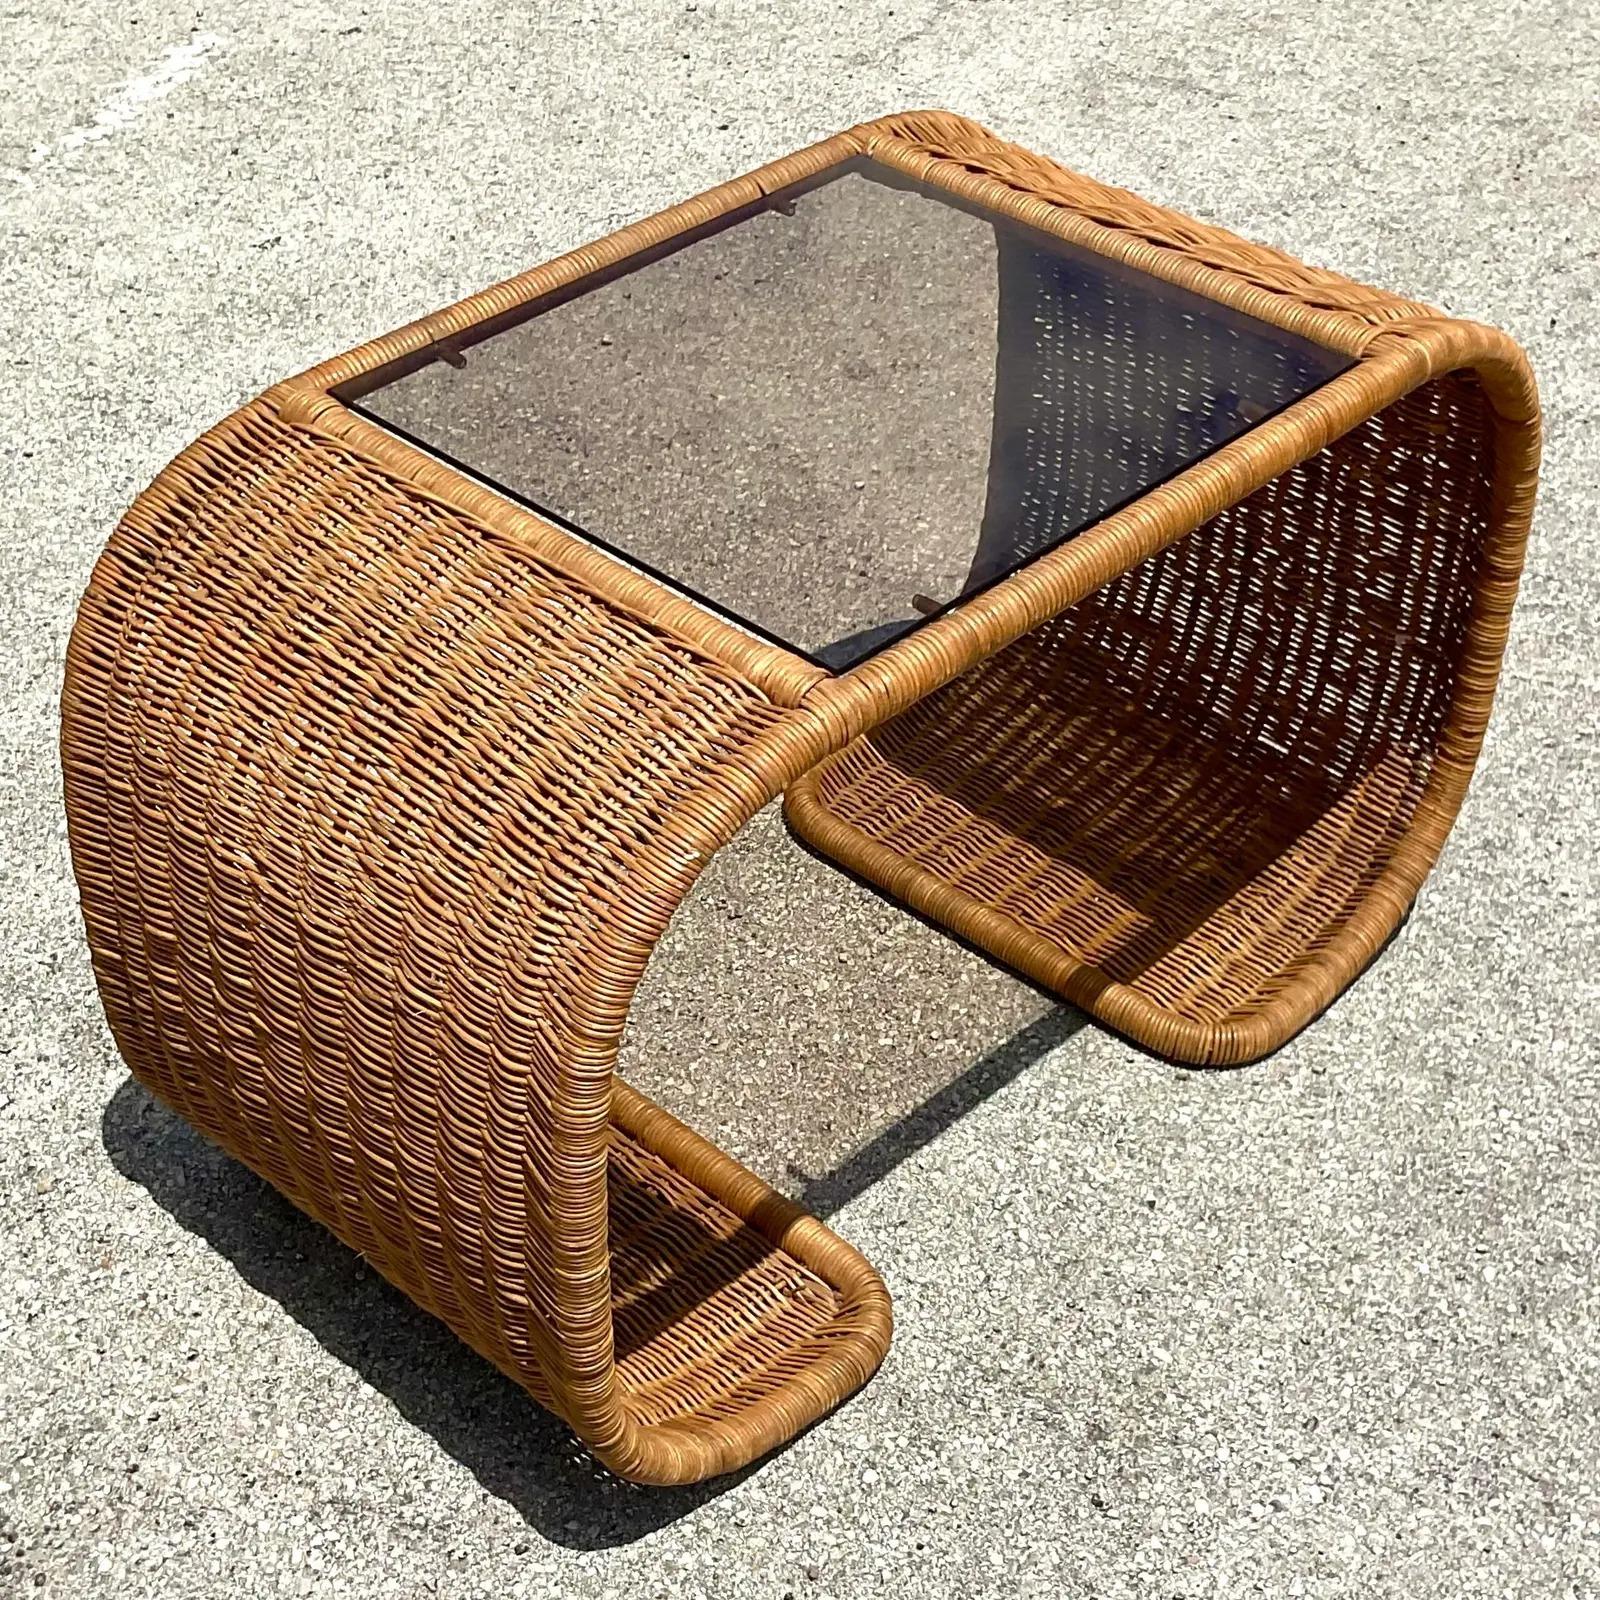 Vintage Coastal coffee table. Fabulous woven rattan in a chic waterfall shape. Inset glass panel on top. Acquired from a Palm Beach estate.